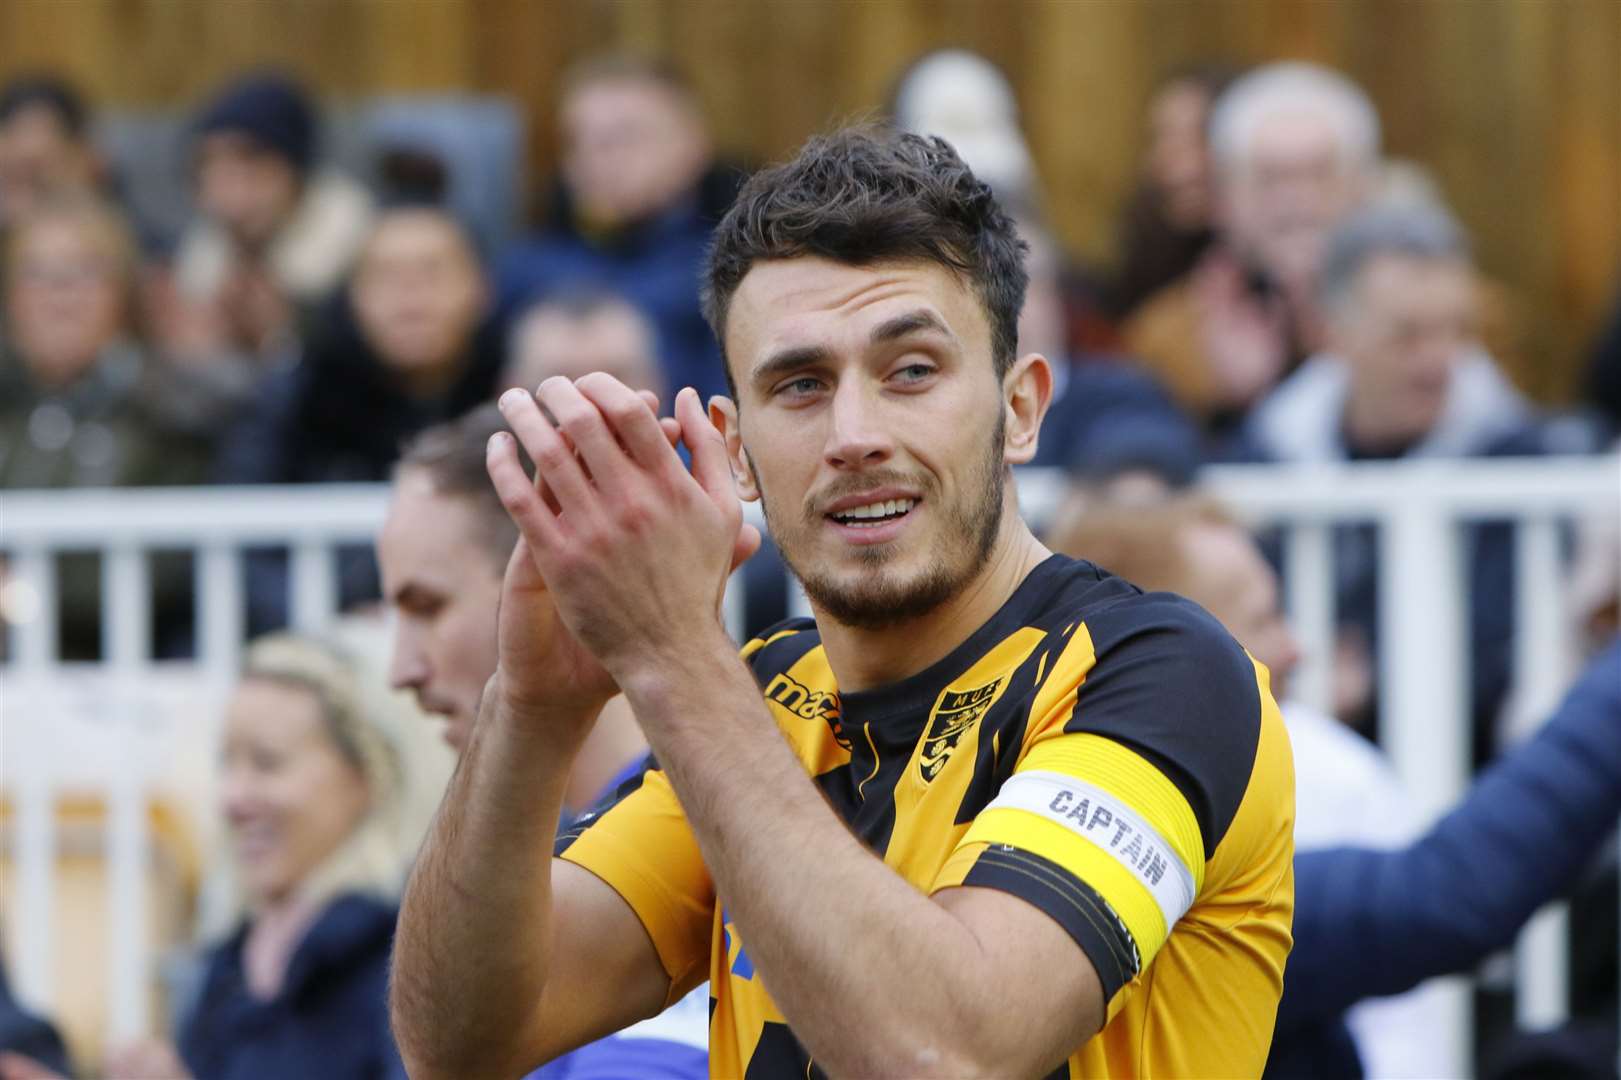 Will De Havilland was made captain by caretaker bosses Tristan Lewis and Simon Walton while Blair Turgott recovered from injury Picture: Andy Jones